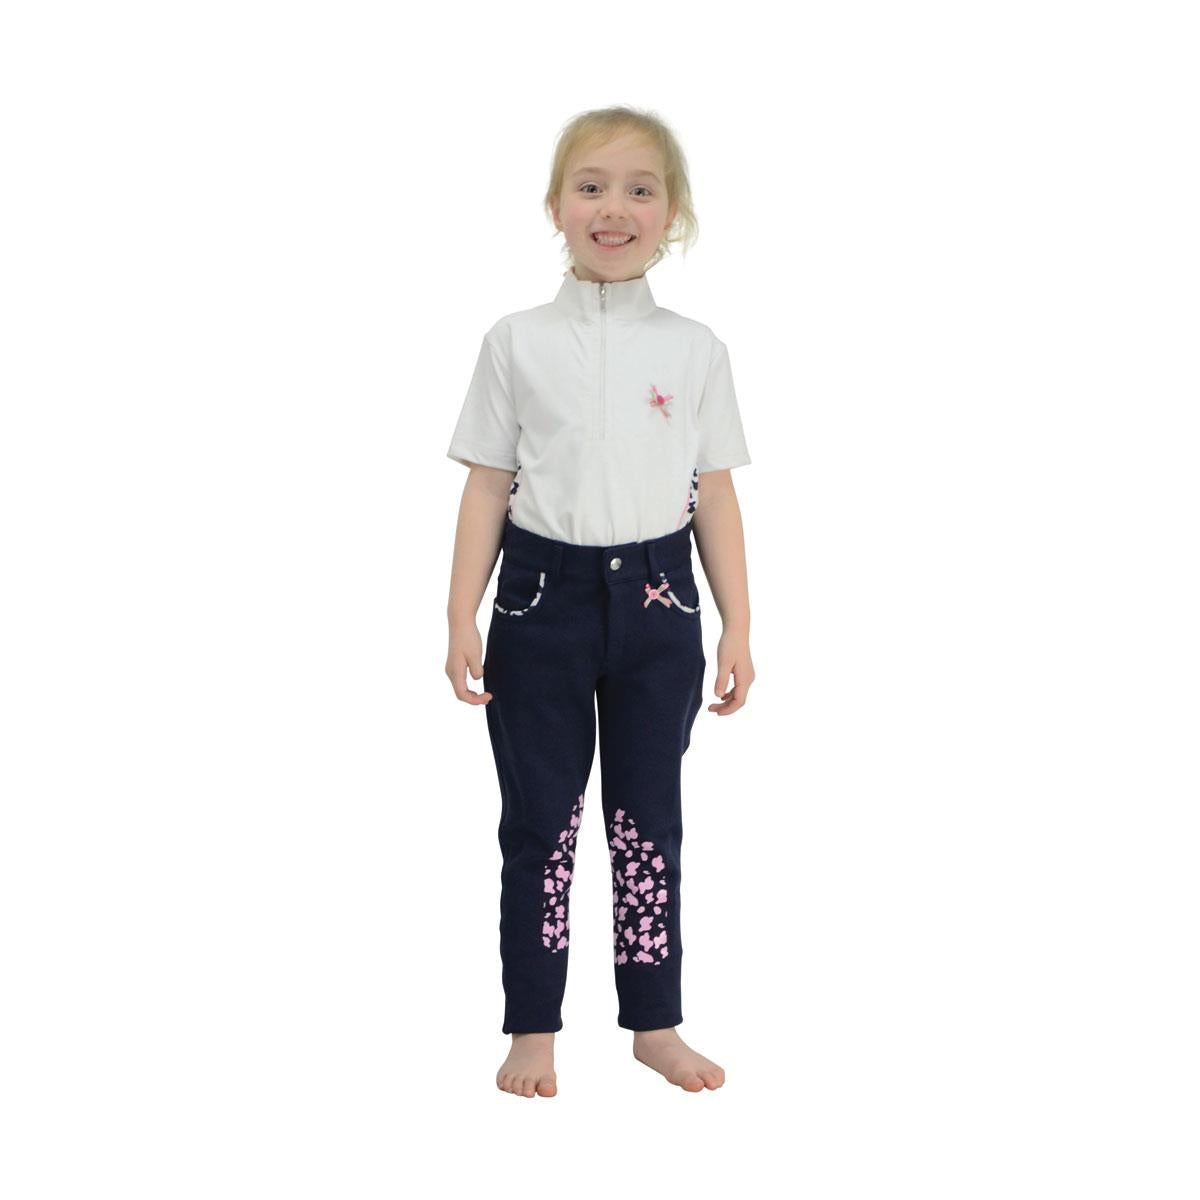 Molly Moo Show Shirt by Little Rider - Just Horse Riders